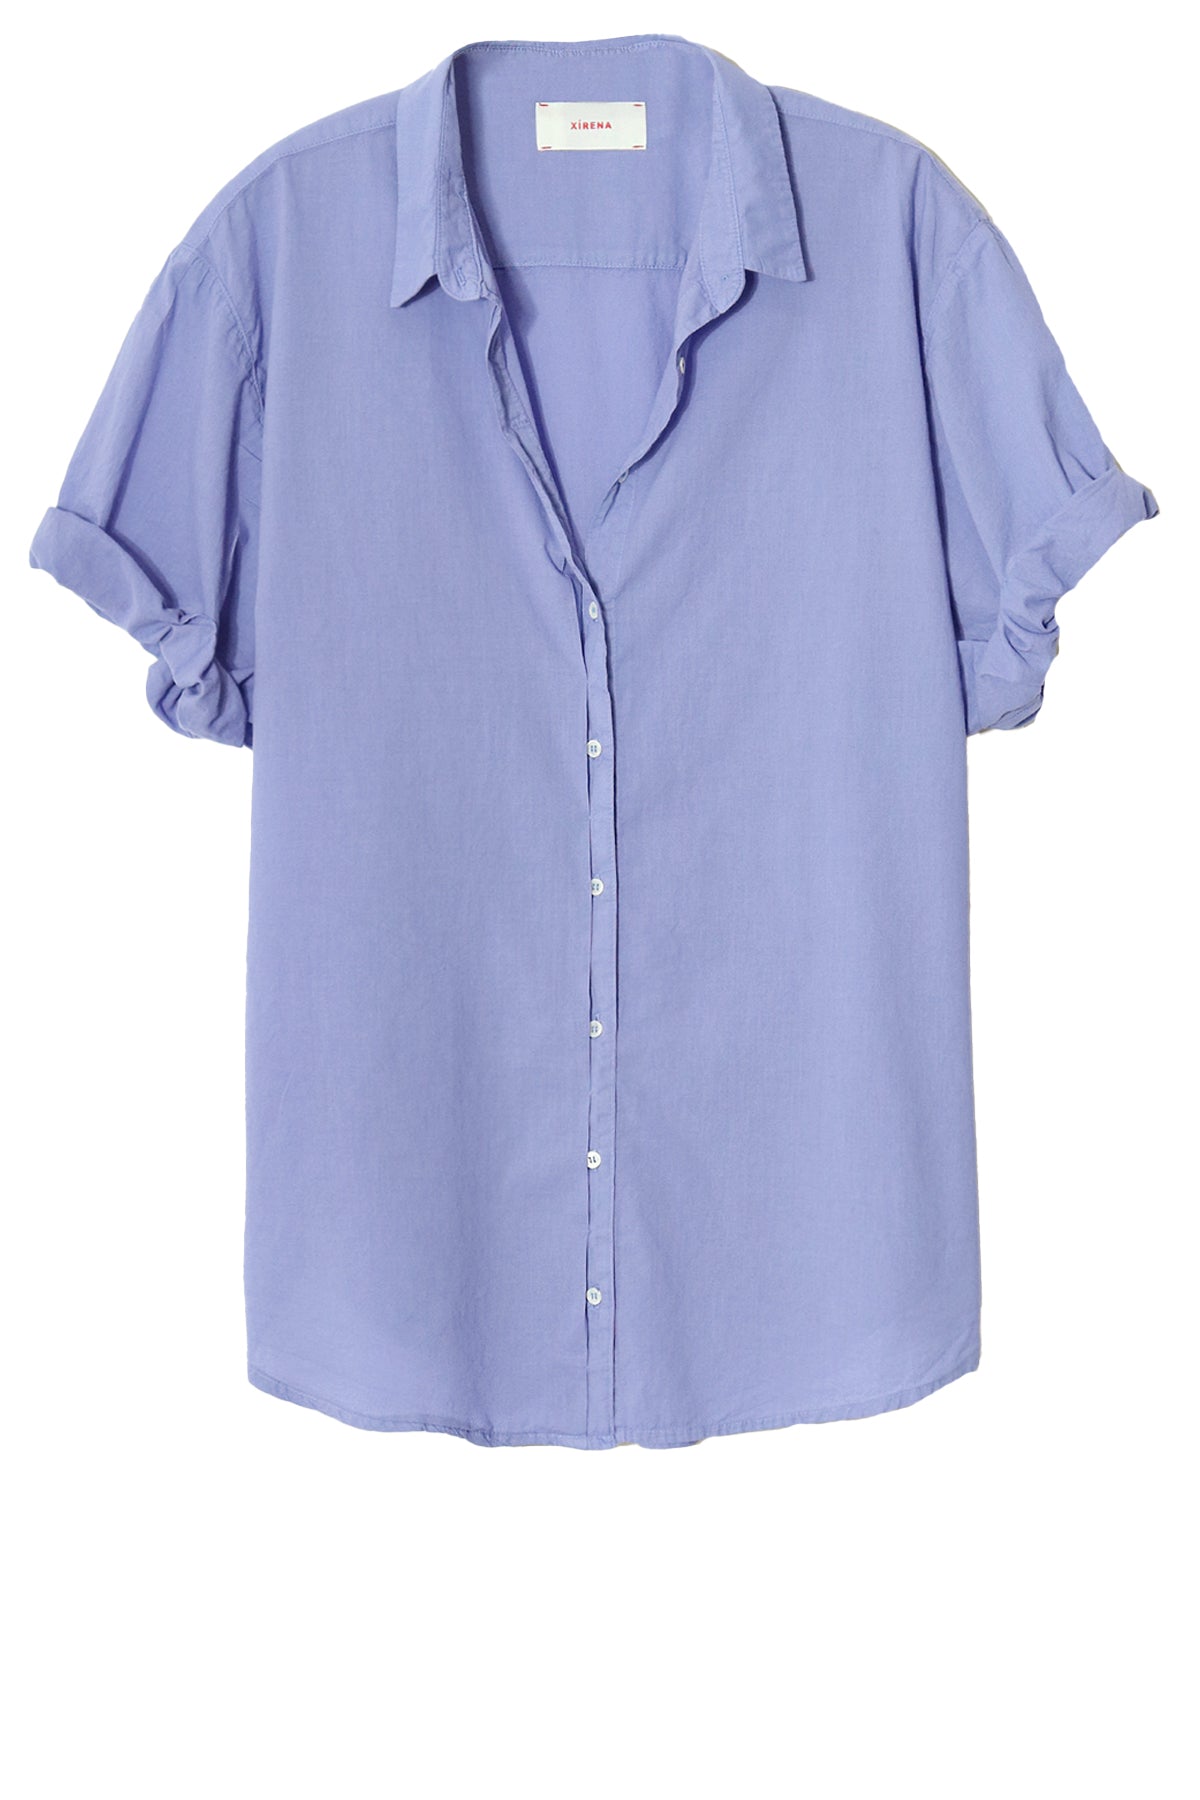 channing shirt - periwinkle